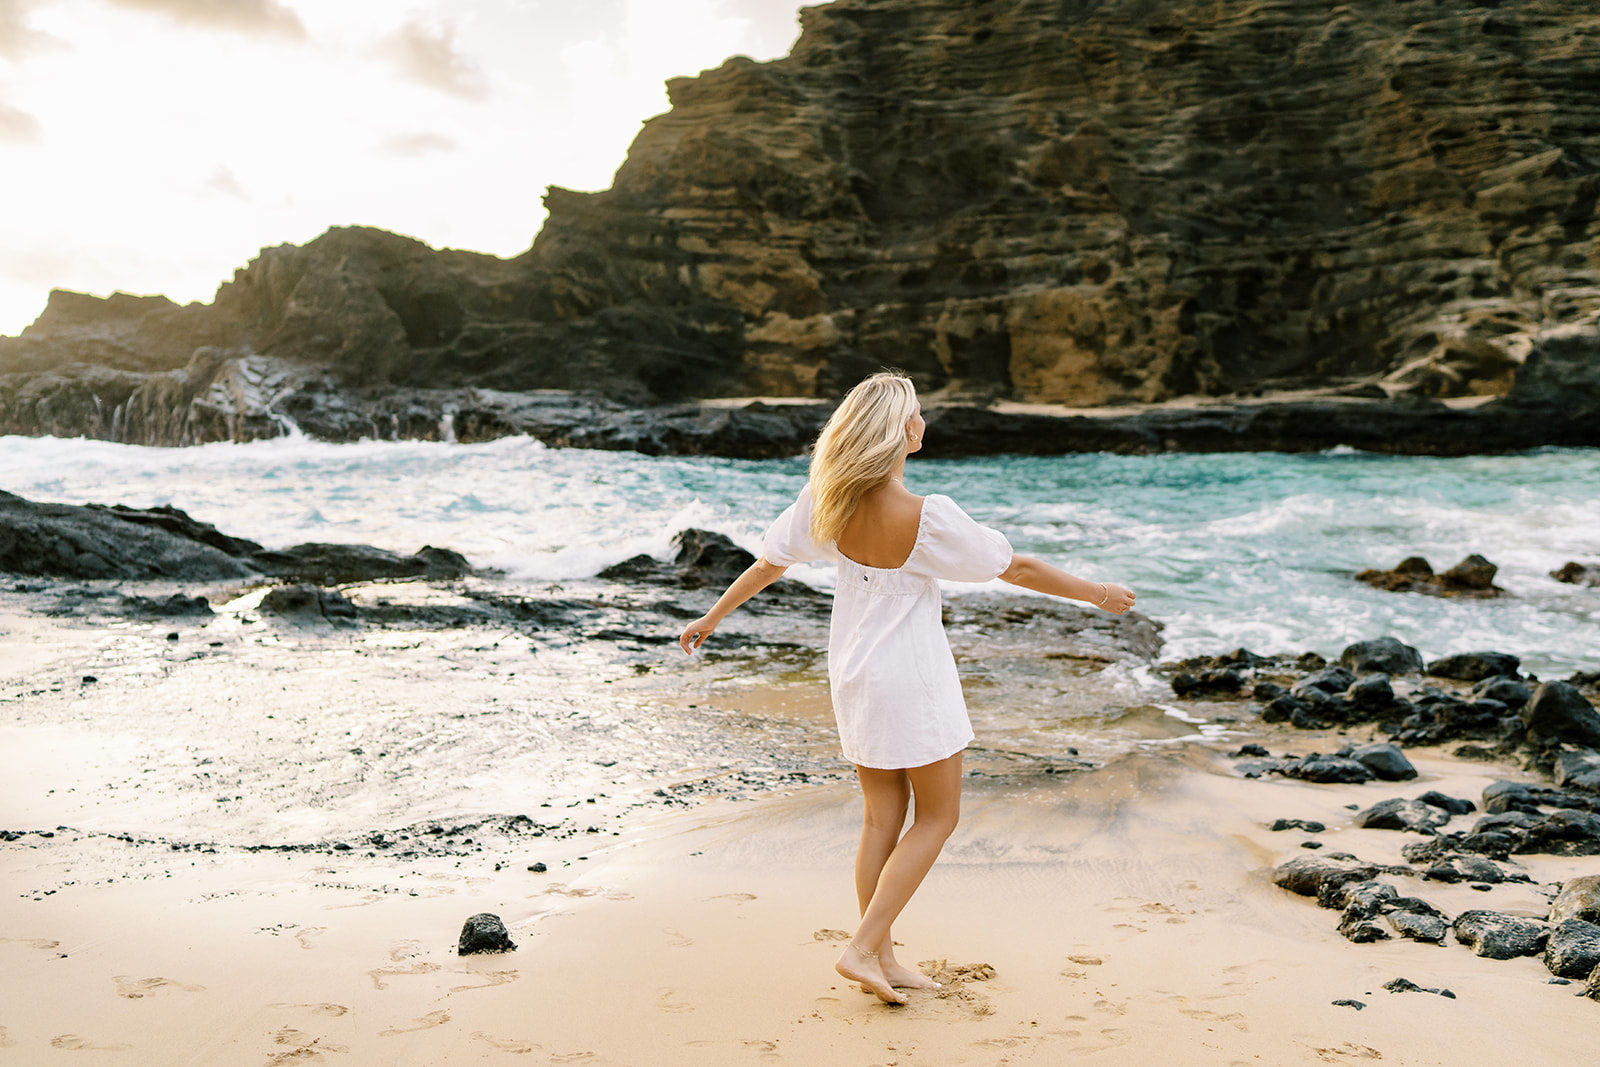 Woman in white dress walking on beach with arms outstretched, facing the ocean and cliffs in Halona Cove